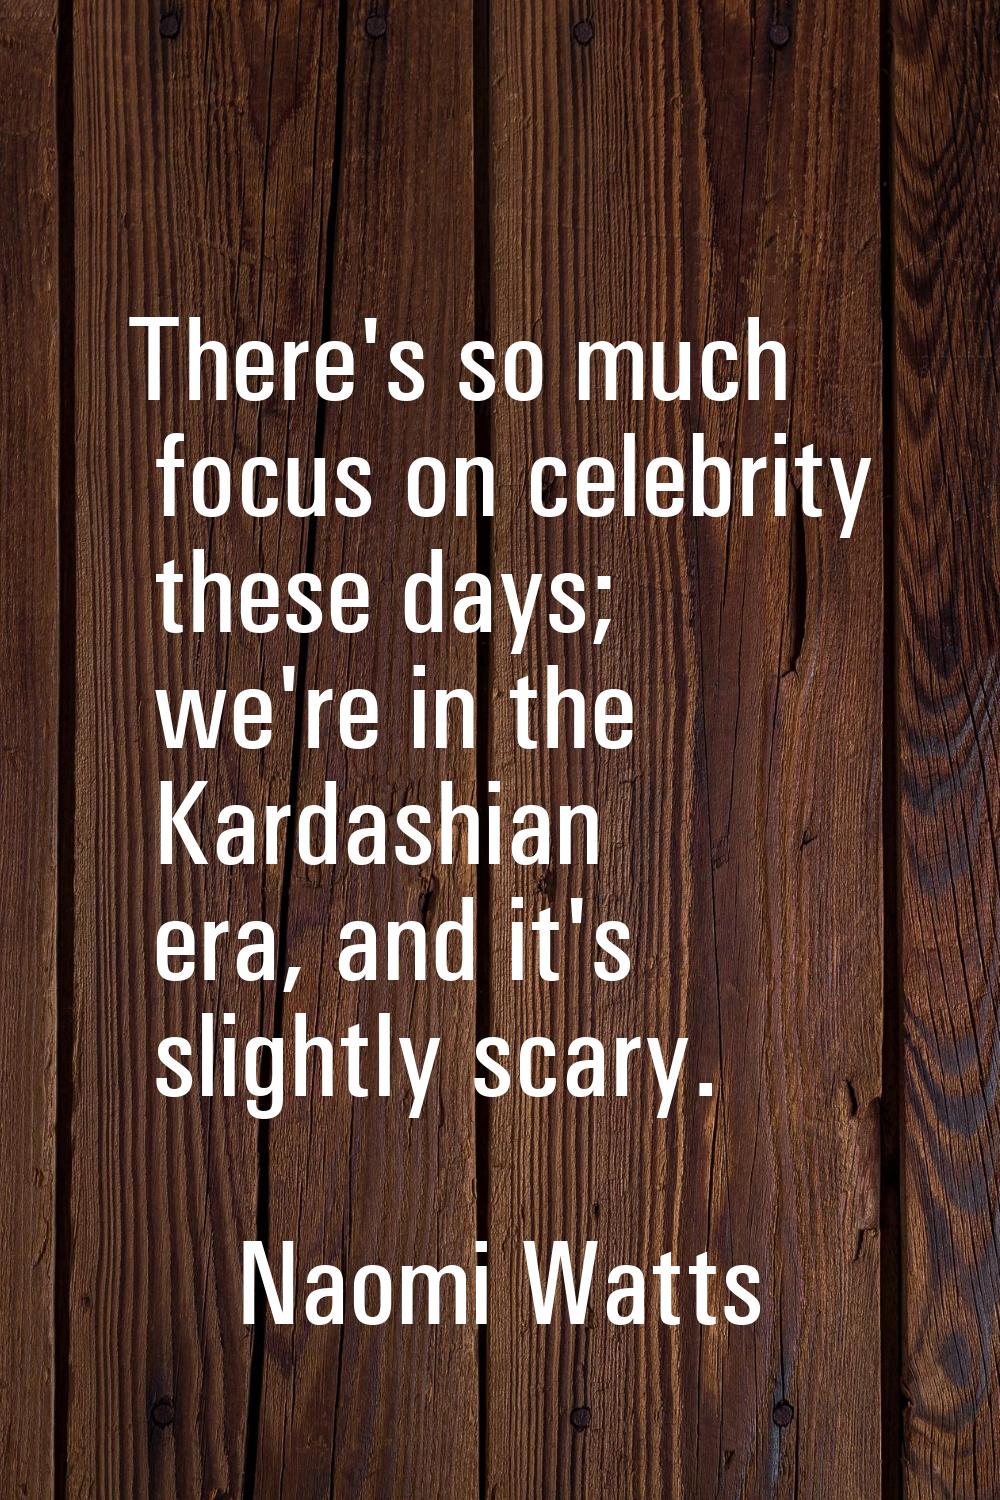 There's so much focus on celebrity these days; we're in the Kardashian era, and it's slightly scary